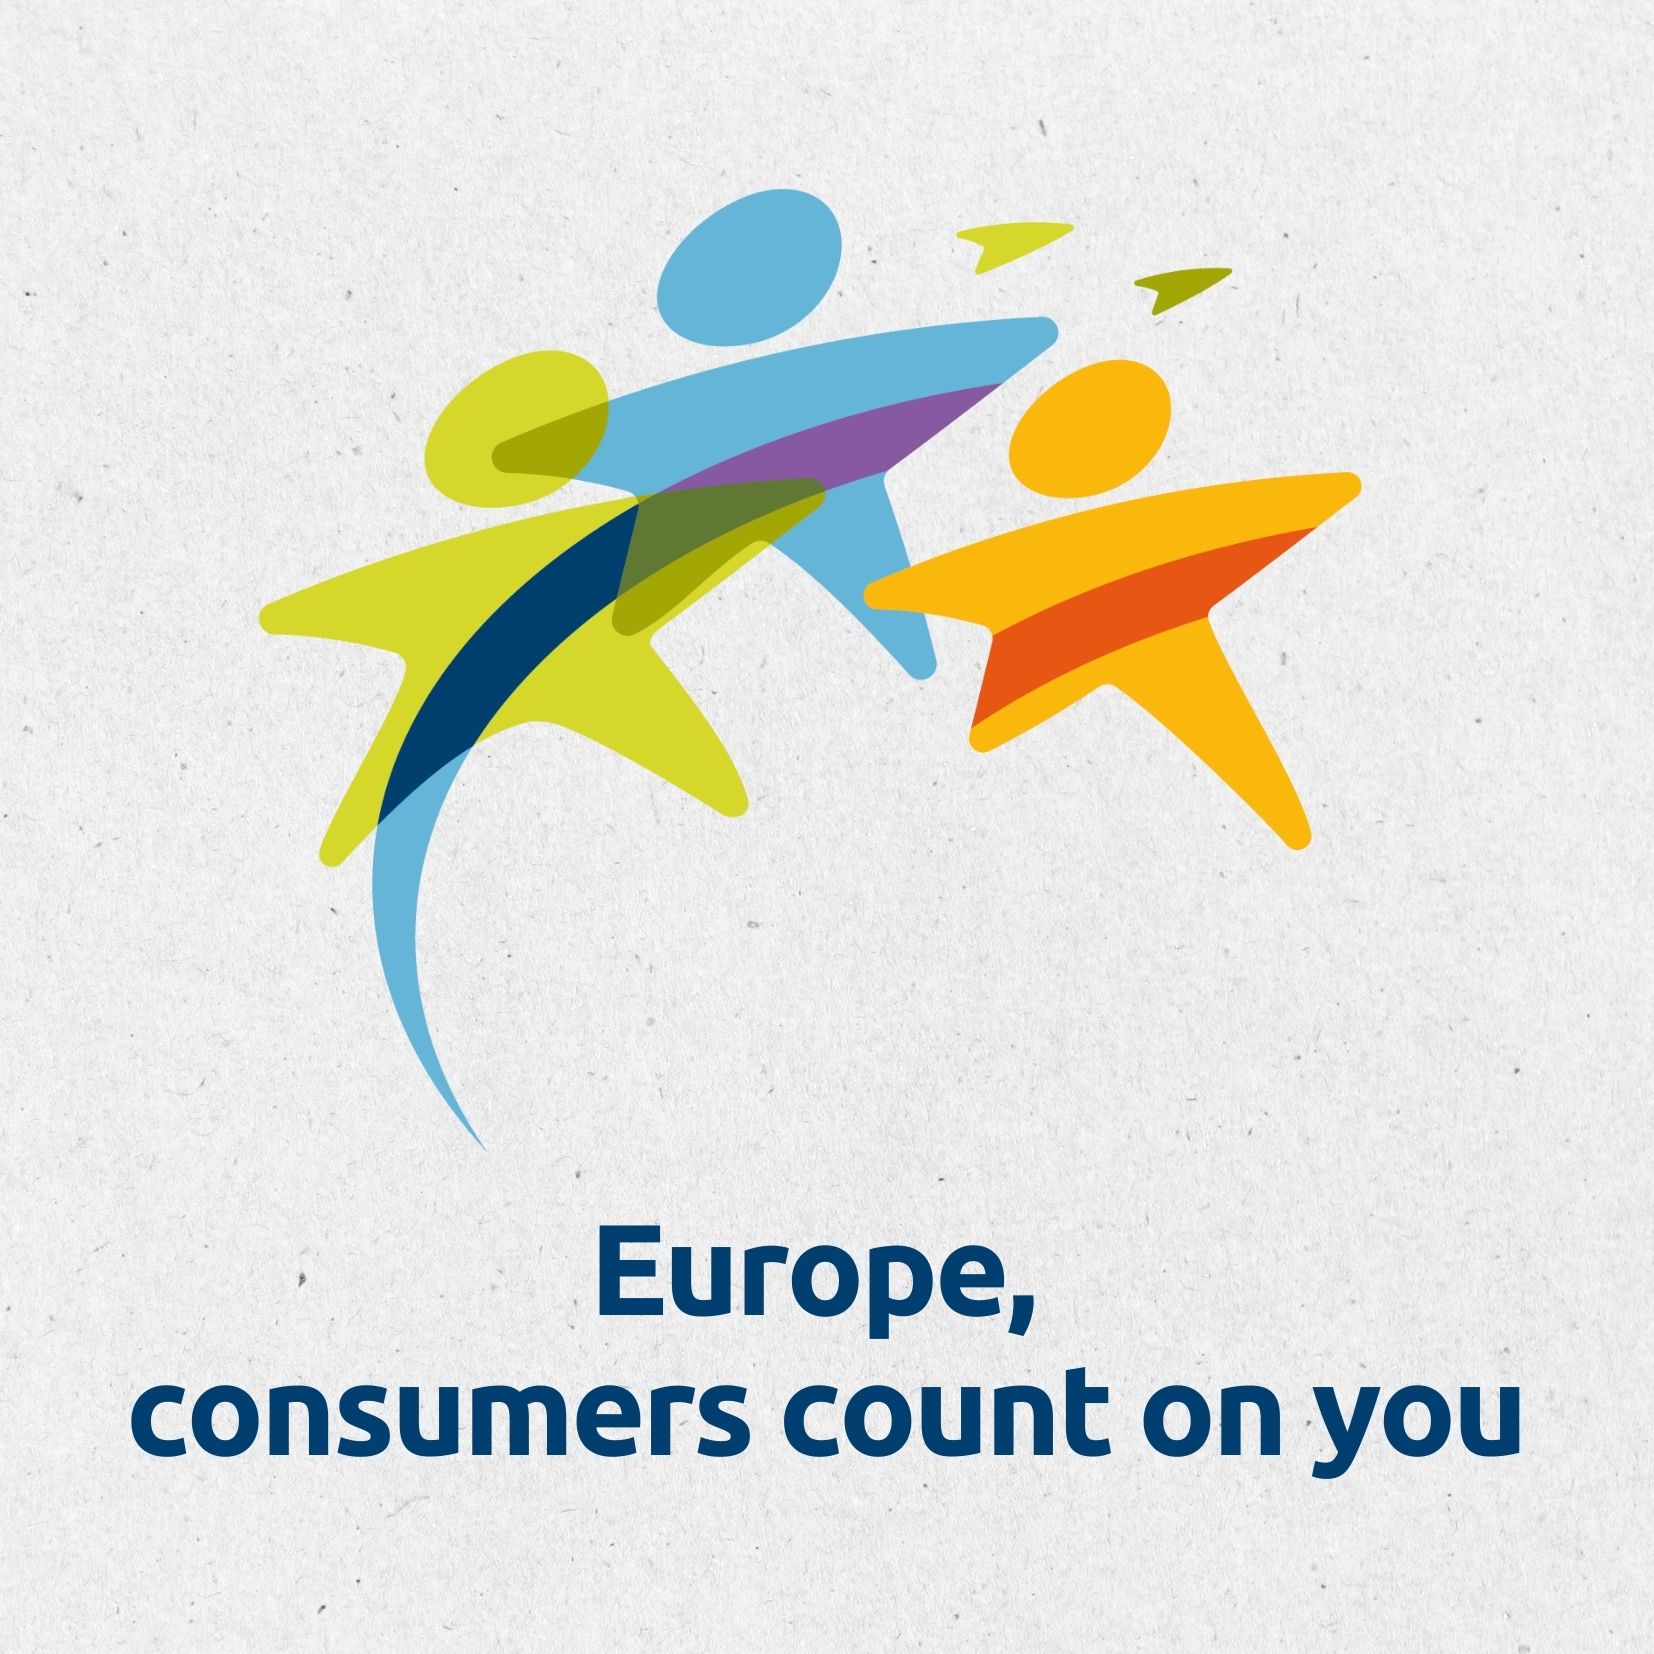 Europe, consumers count on you